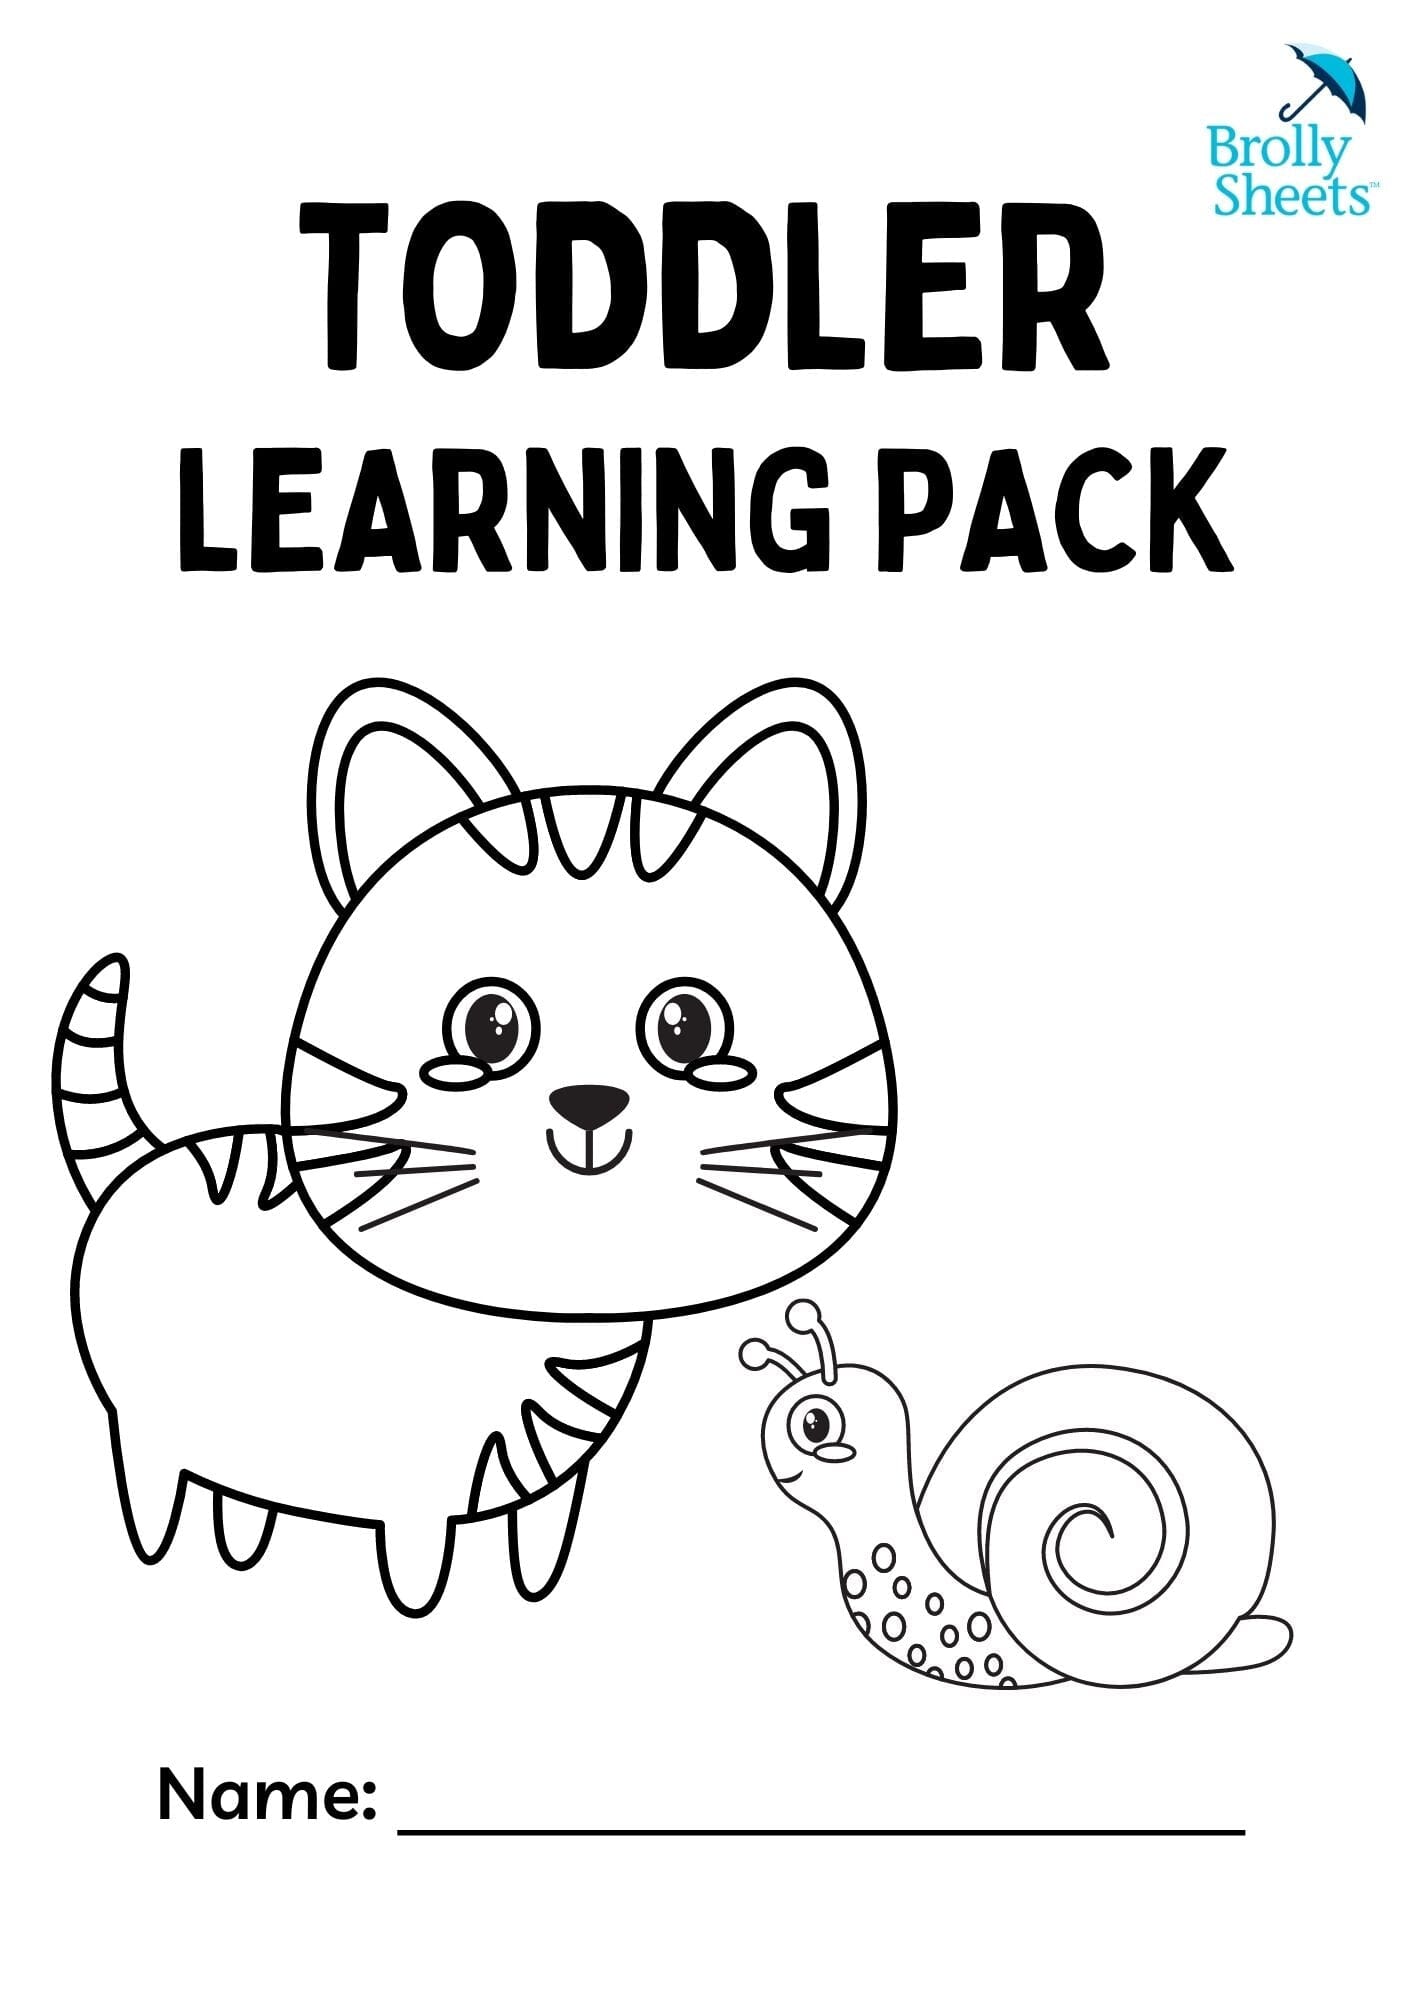 Toddler Activity Pack - Brolly Sheets AU